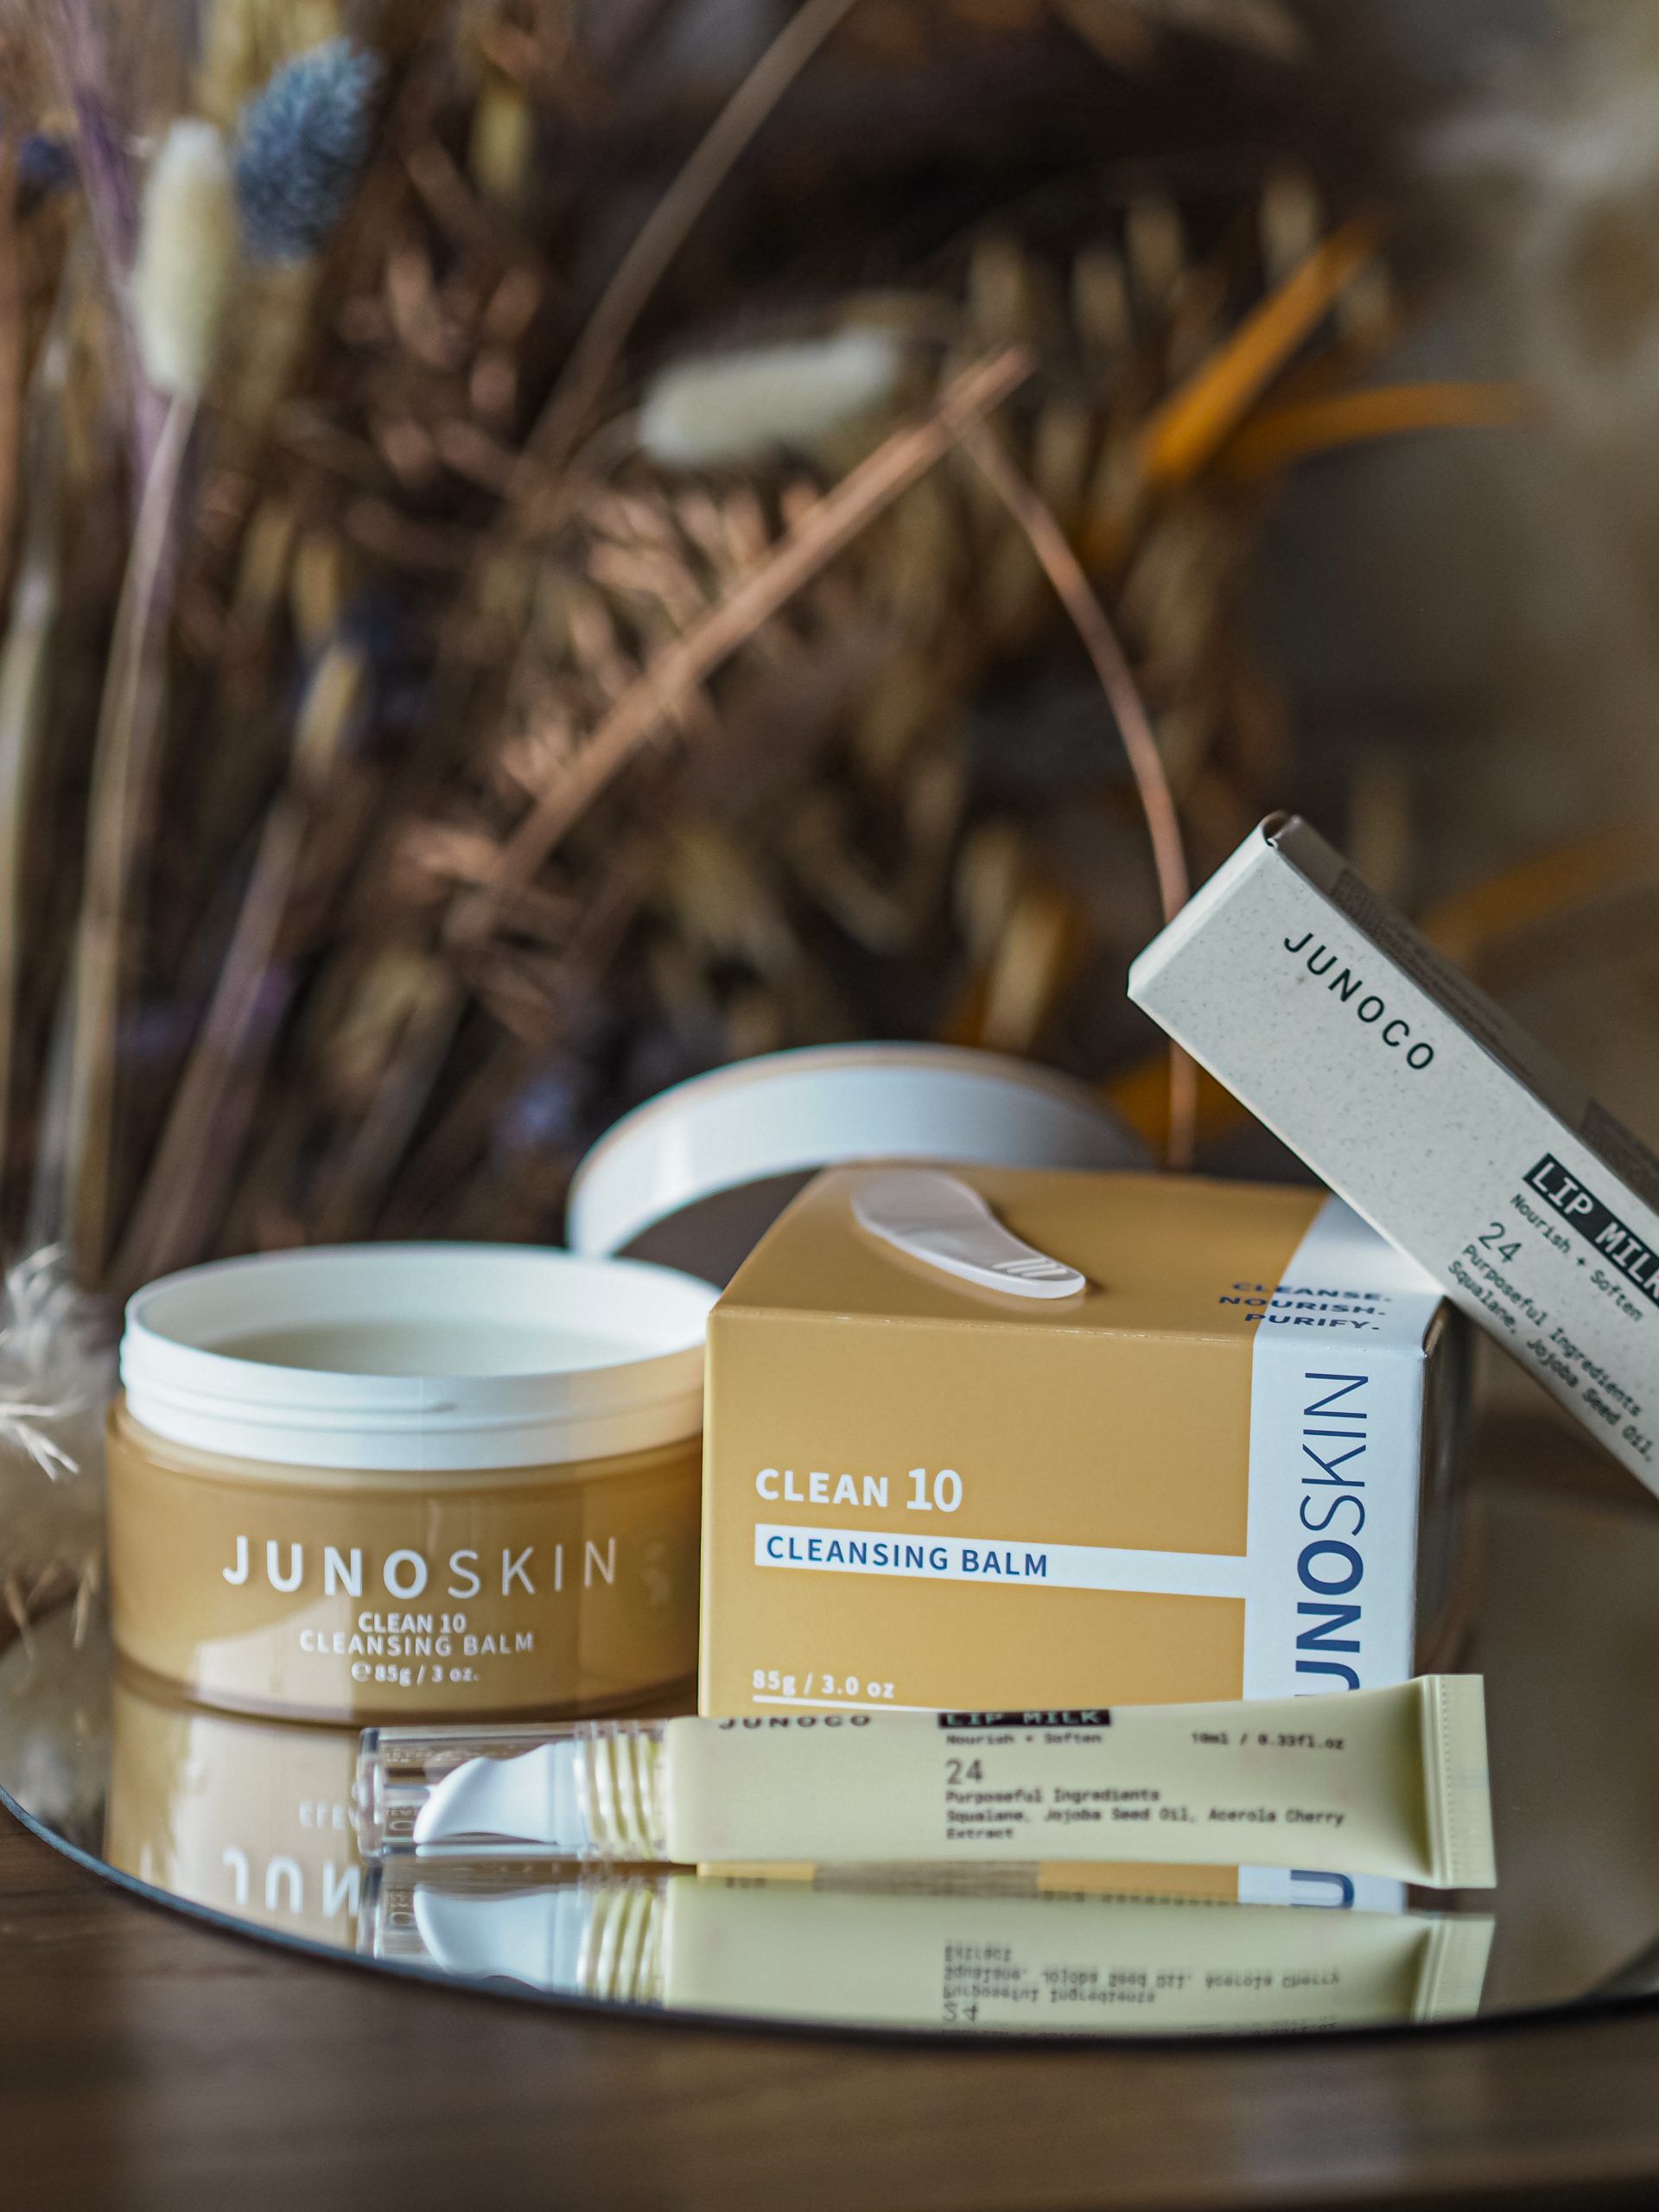 Laura Kate Lucas | Manchester Lifestyle, Fashion and Beauty Blogger - Junoco Lip Milk and Clean 10 Cleansing Balm